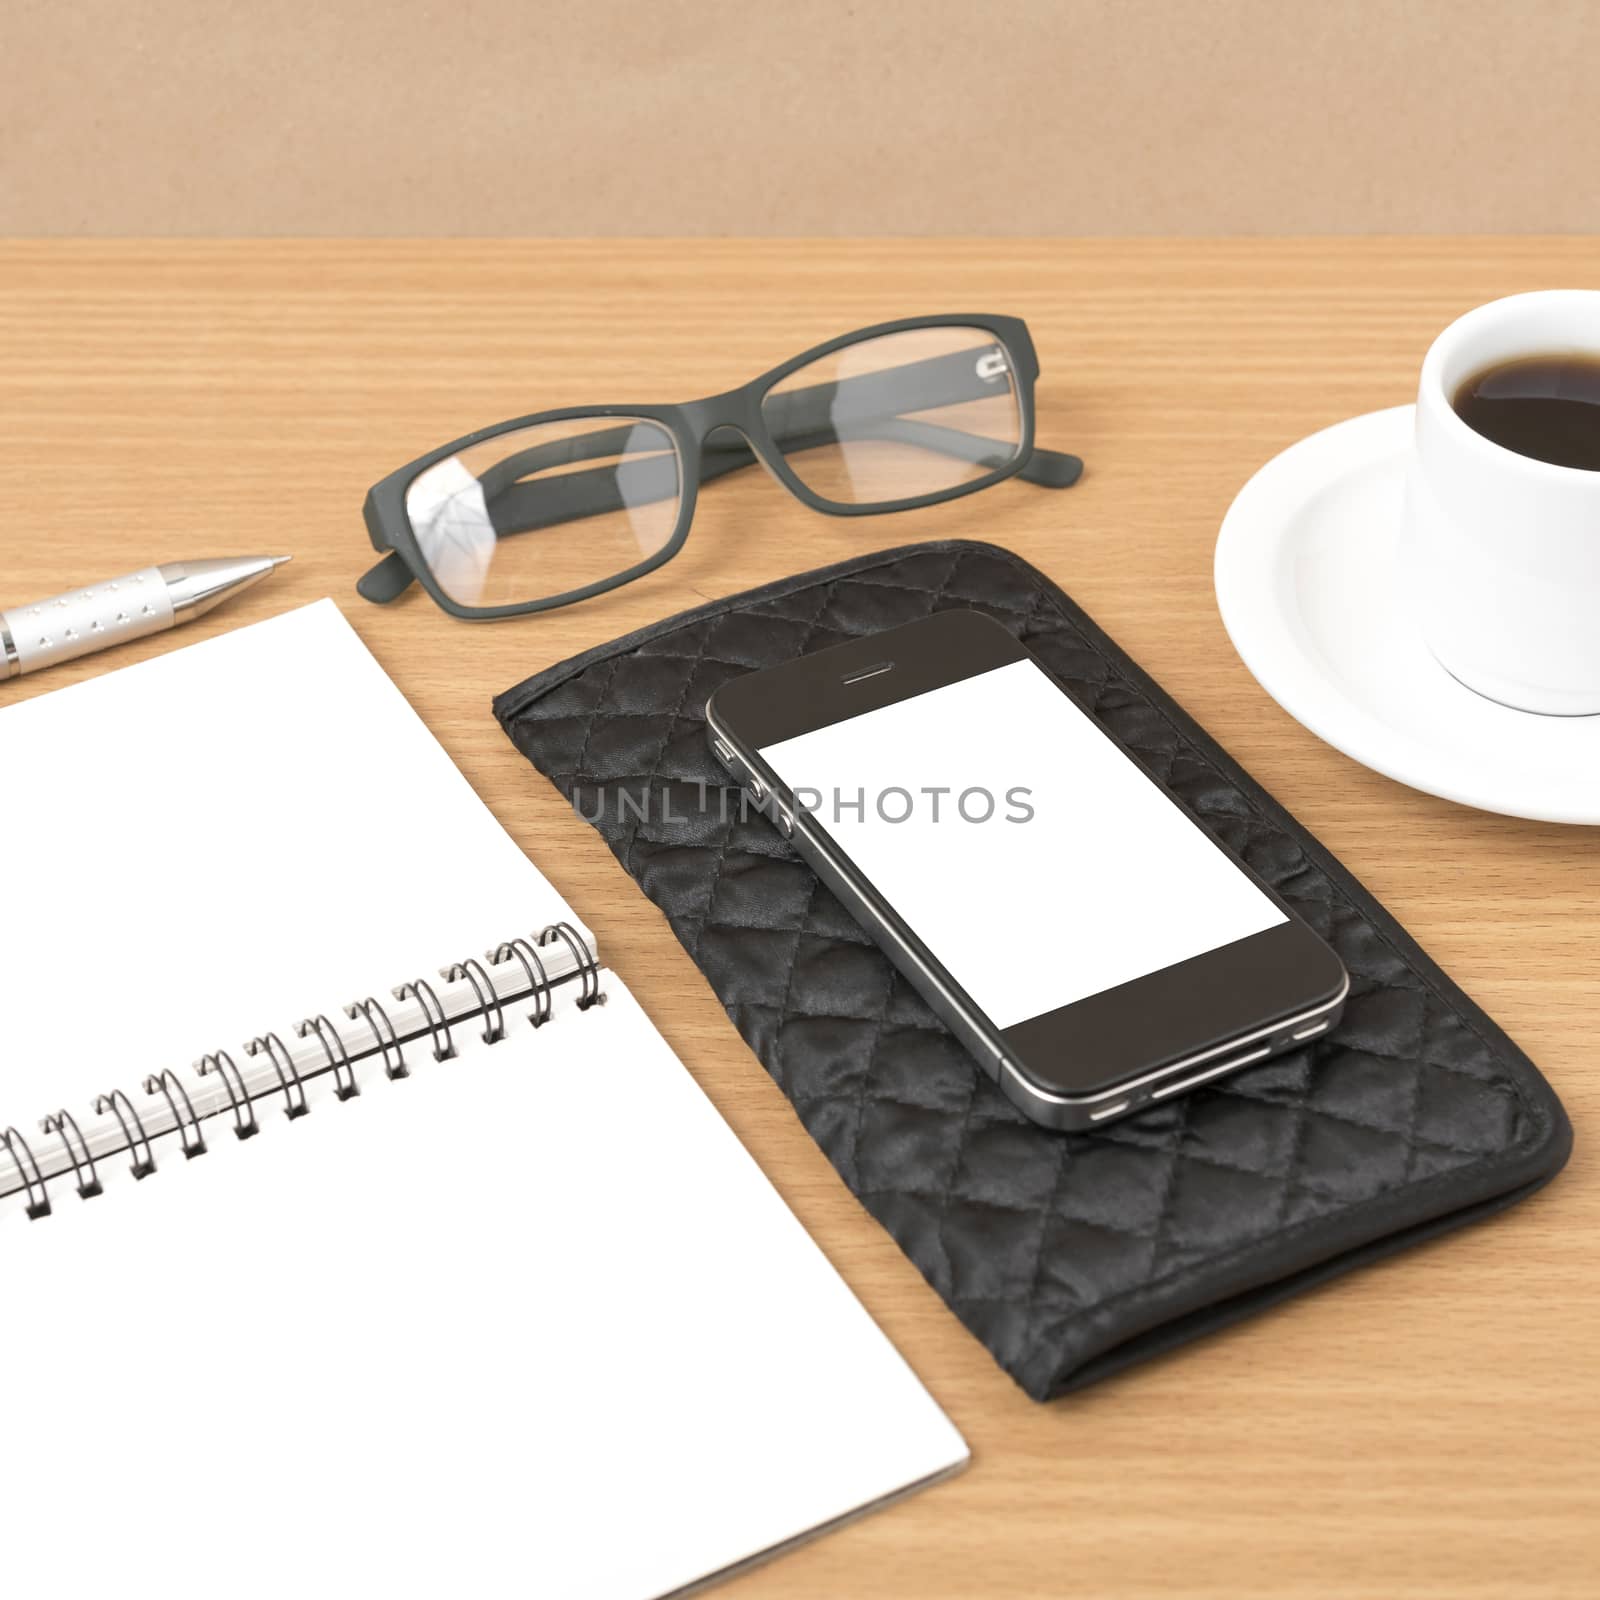 coffee,phone,eyeglasses,notepad and wallet on wood table background